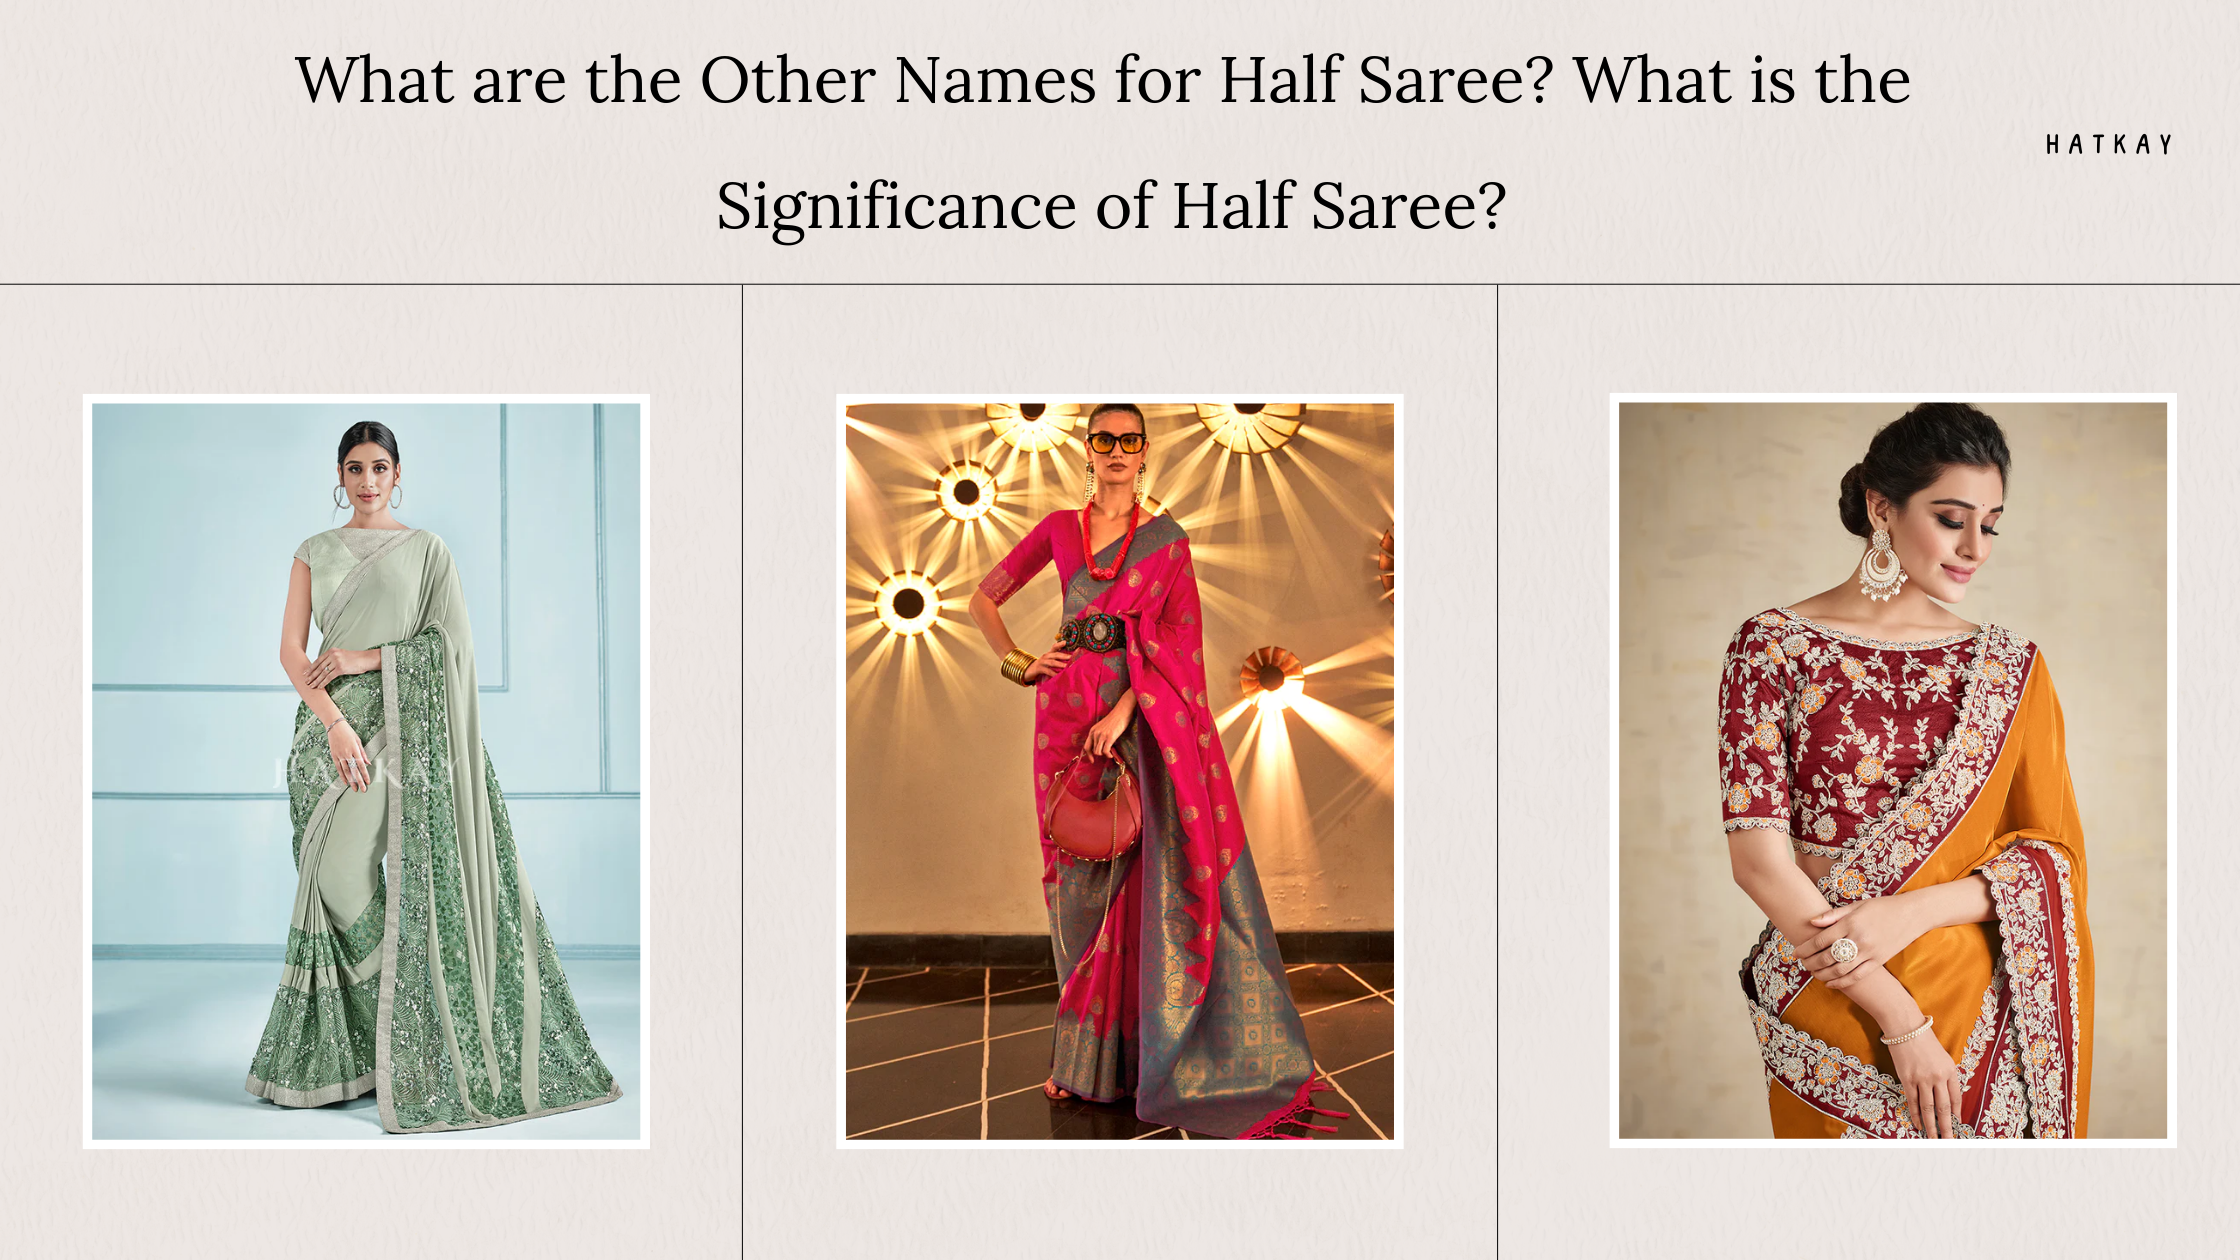 What are the Other Names for Half Saree? What is the Significance of Half Saree?